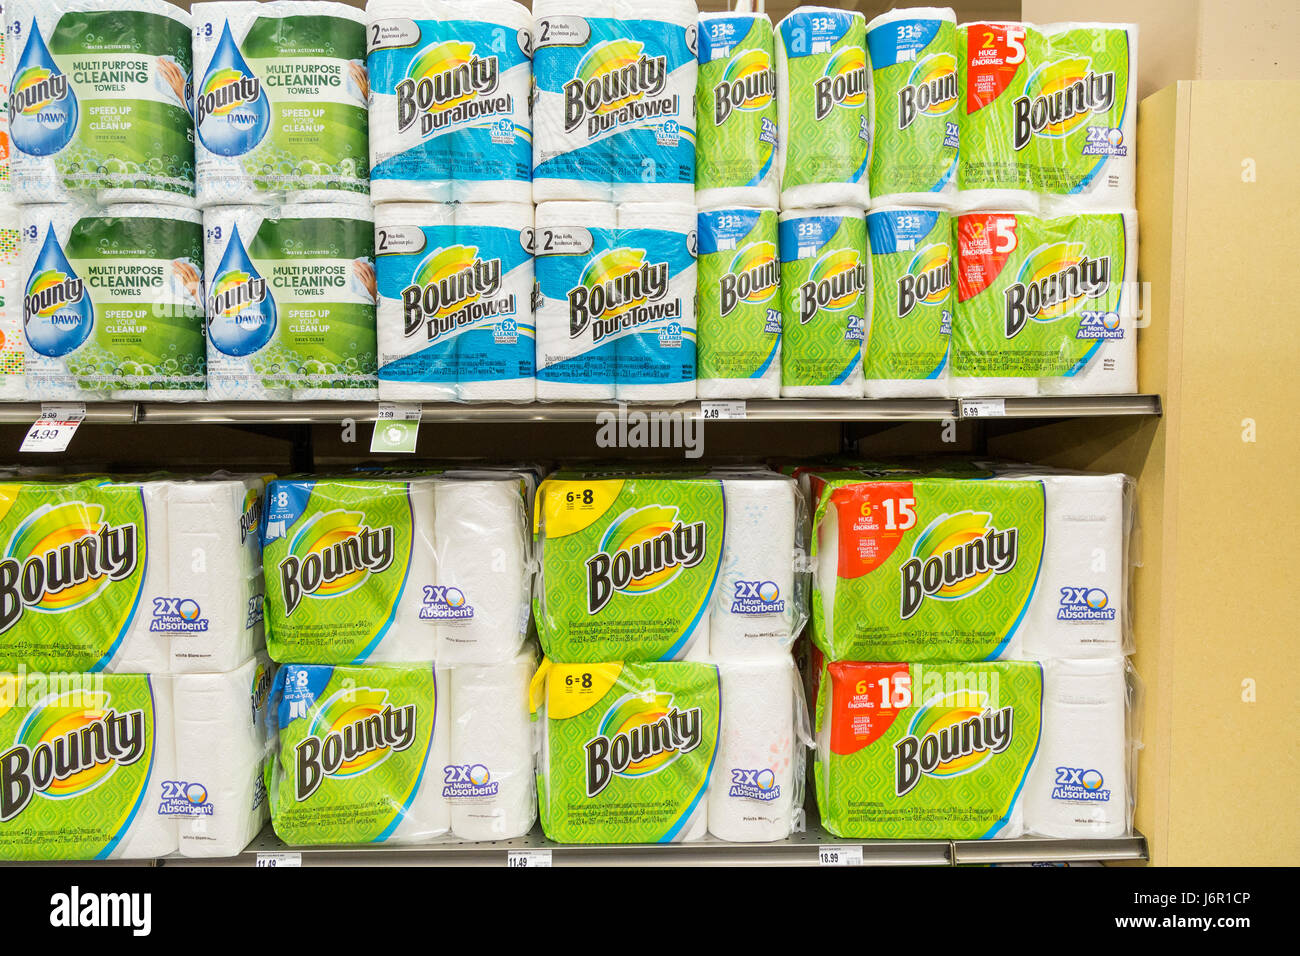 packages of Bounty brand paper towels stacked on grocery store shelves Stock Photo